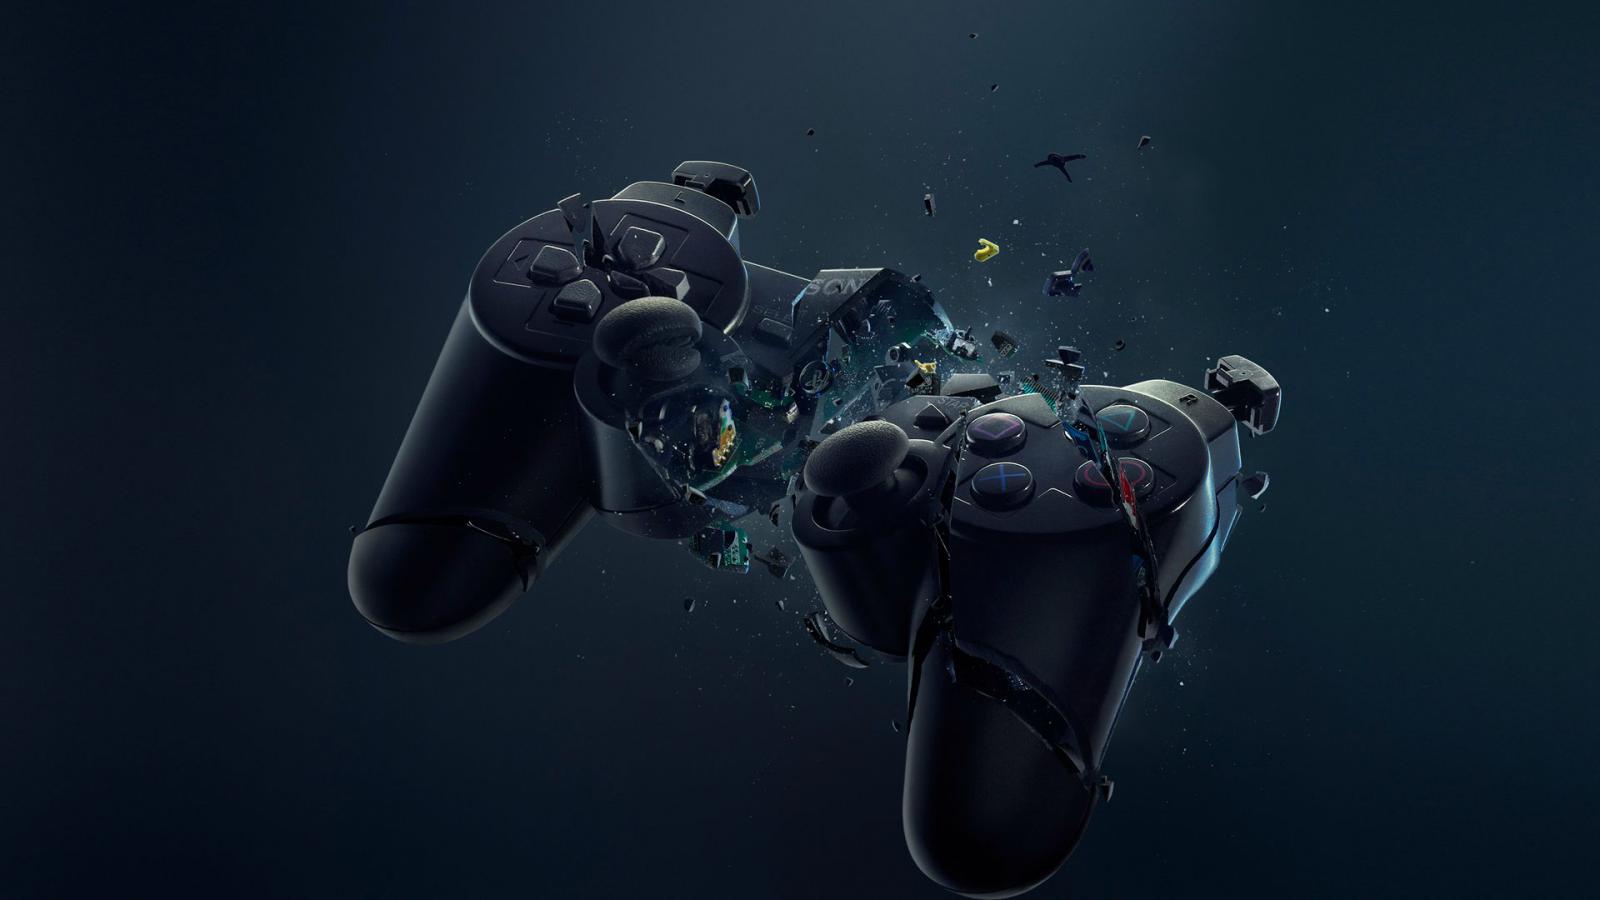 Smashed PS4 - A smashed PS4 controller